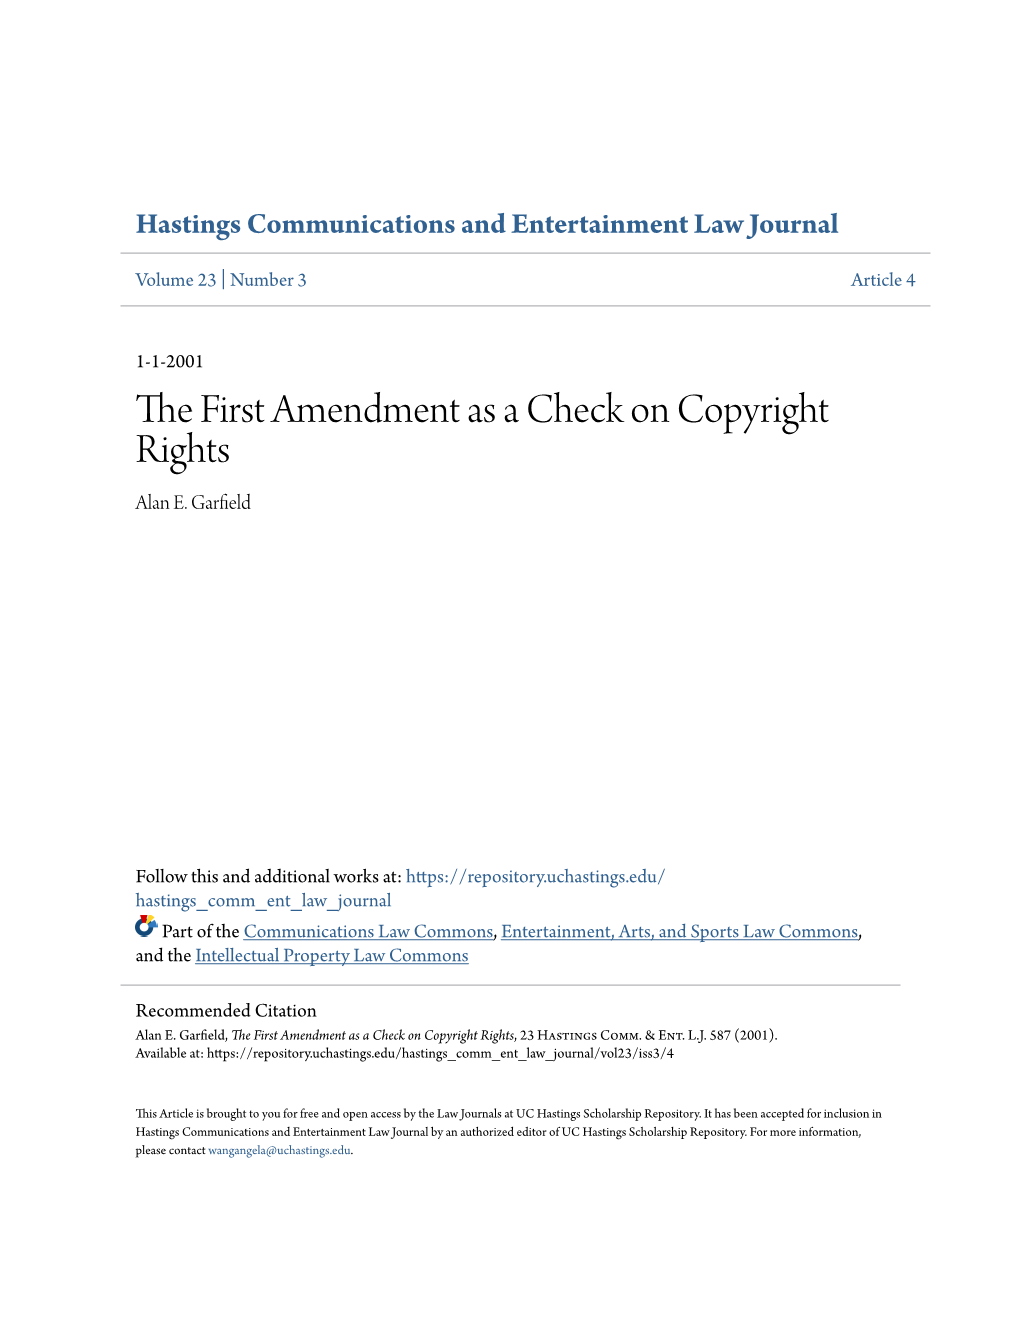 The First Amendment As a Check on Copyright Rights, 23 Hastings Comm